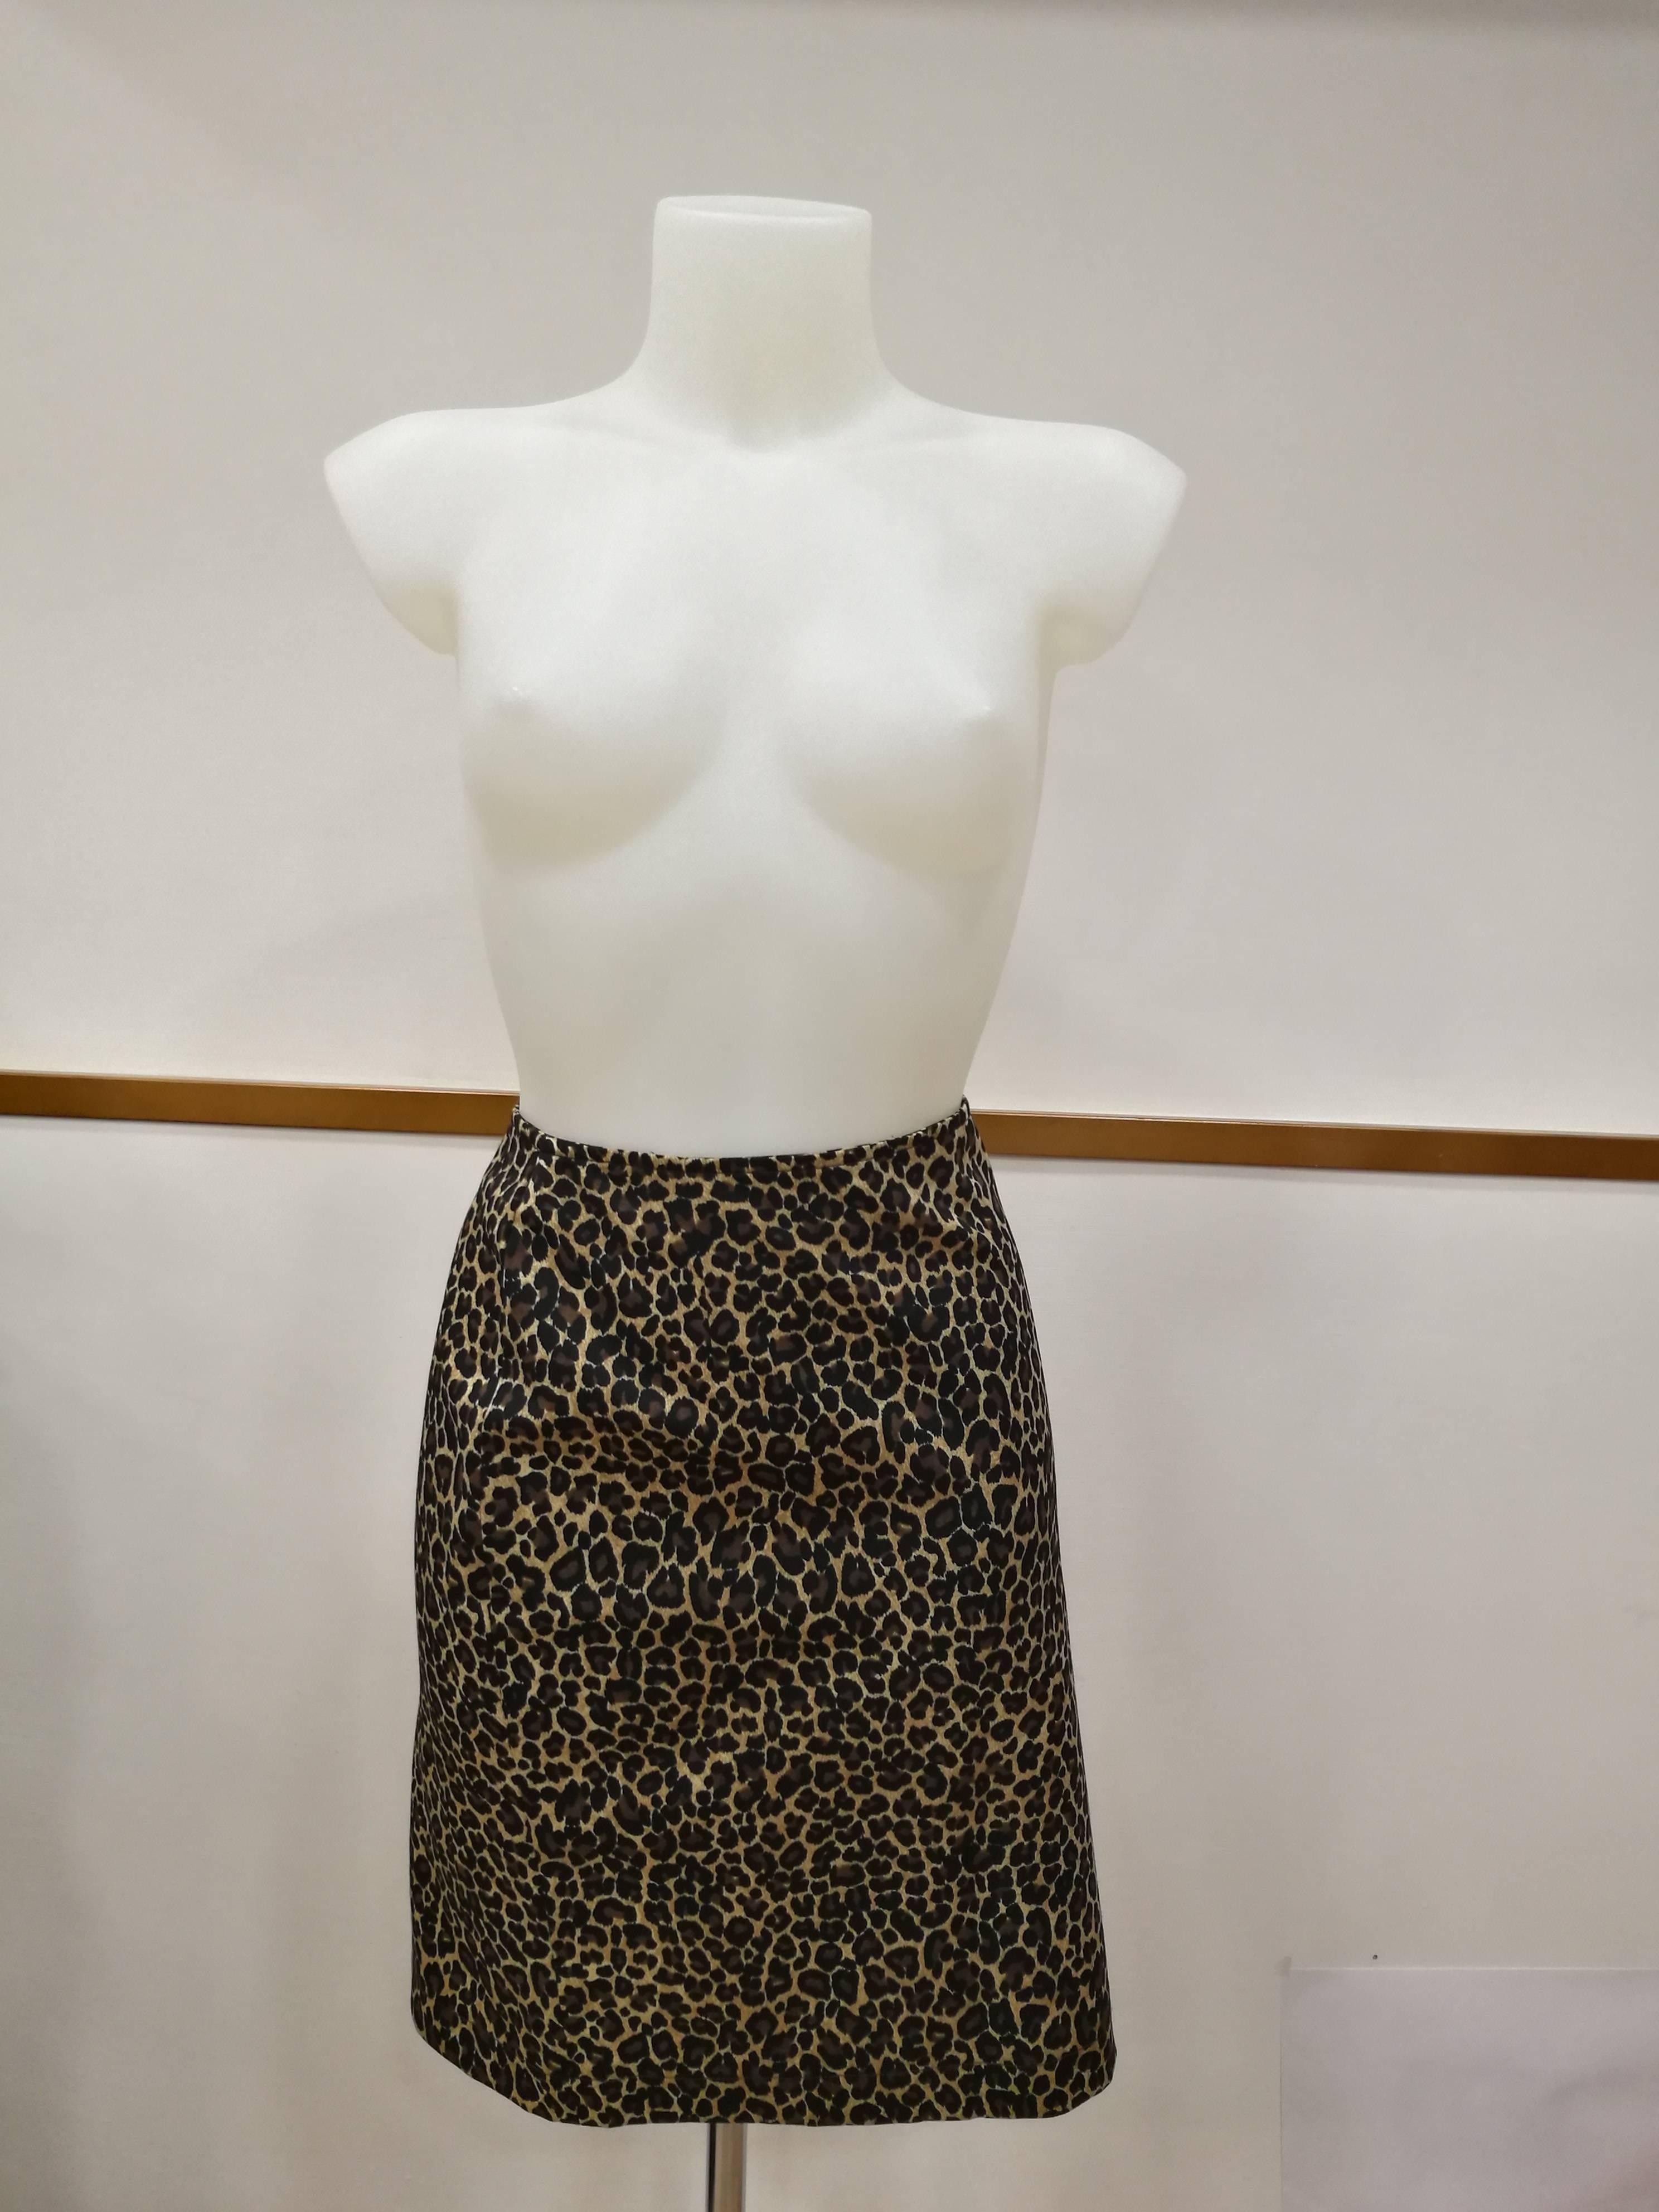 Vintage Moschino cheetah Skirt

Totally made in italy in italian size range 44

Composition: 96 polyester 4 elastane